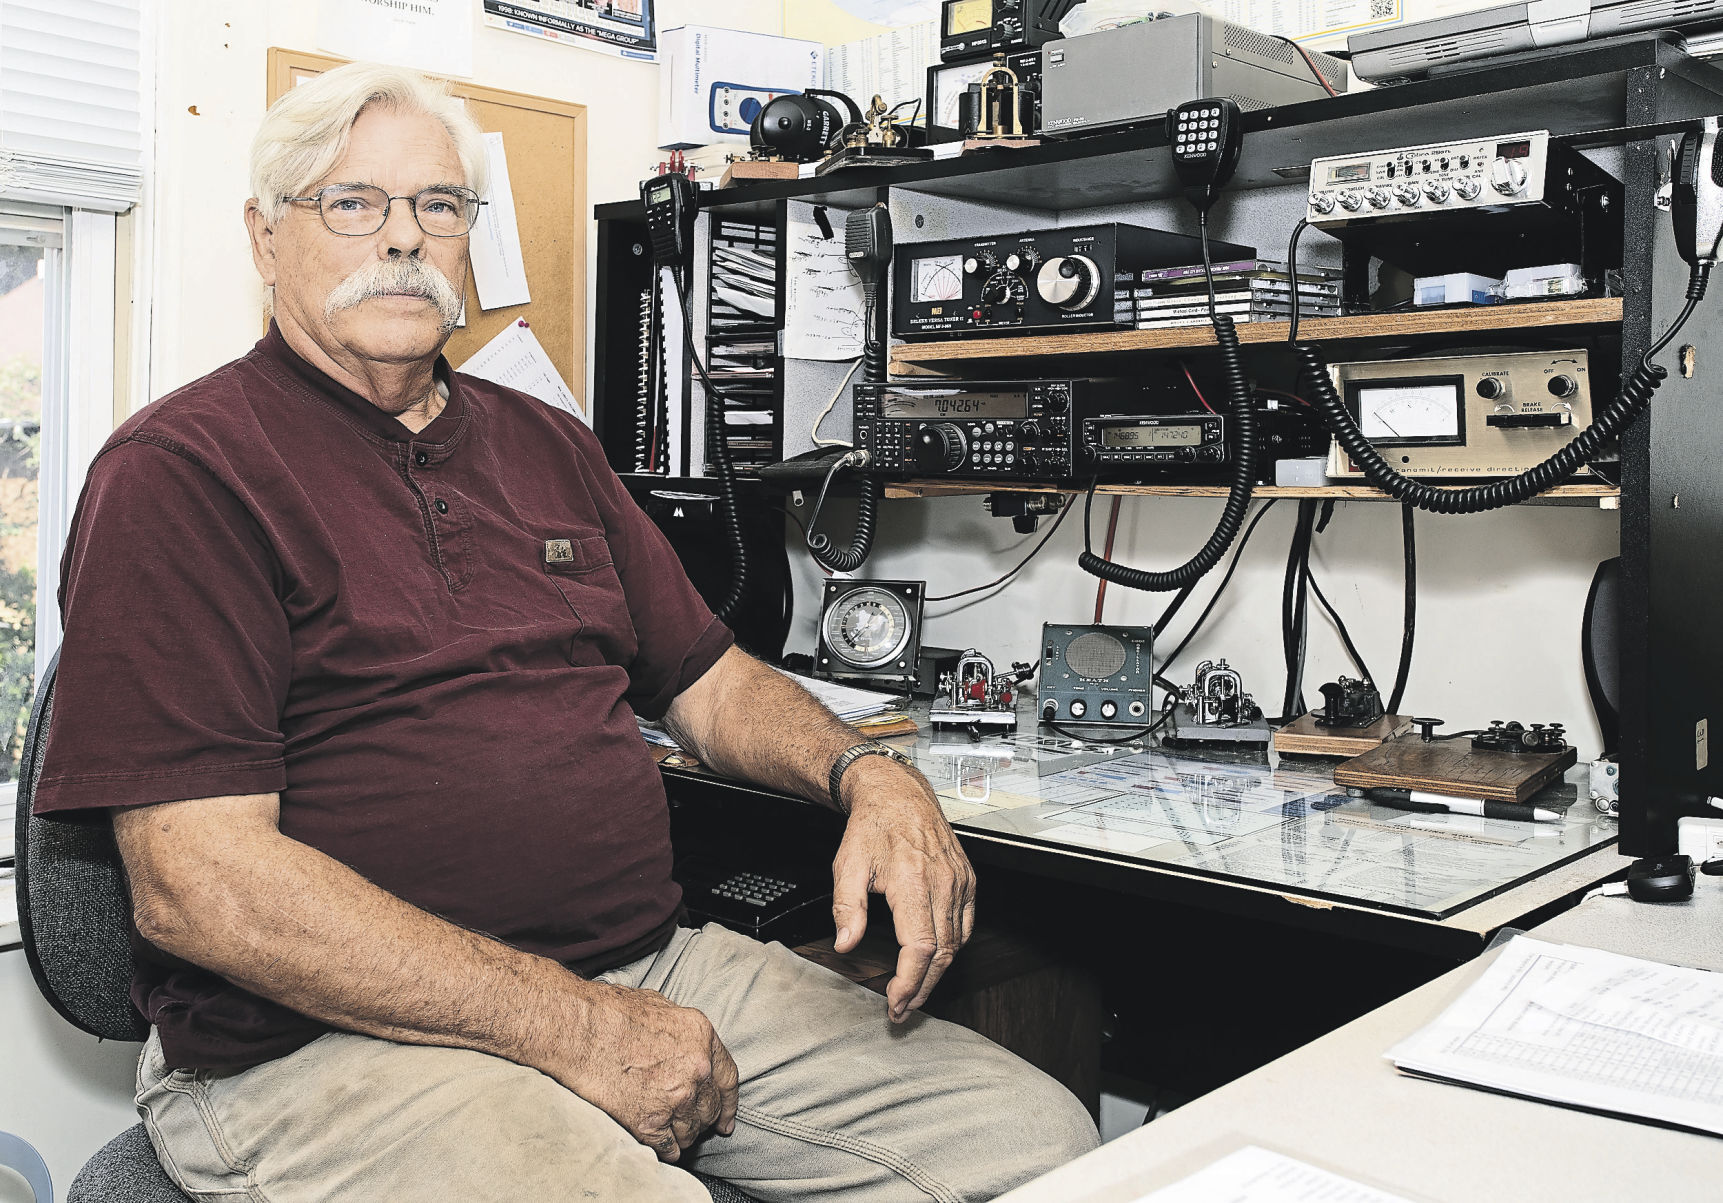 Call signs and community Social amateur radio club readies for emergency response Features telegraphherald hq nude image